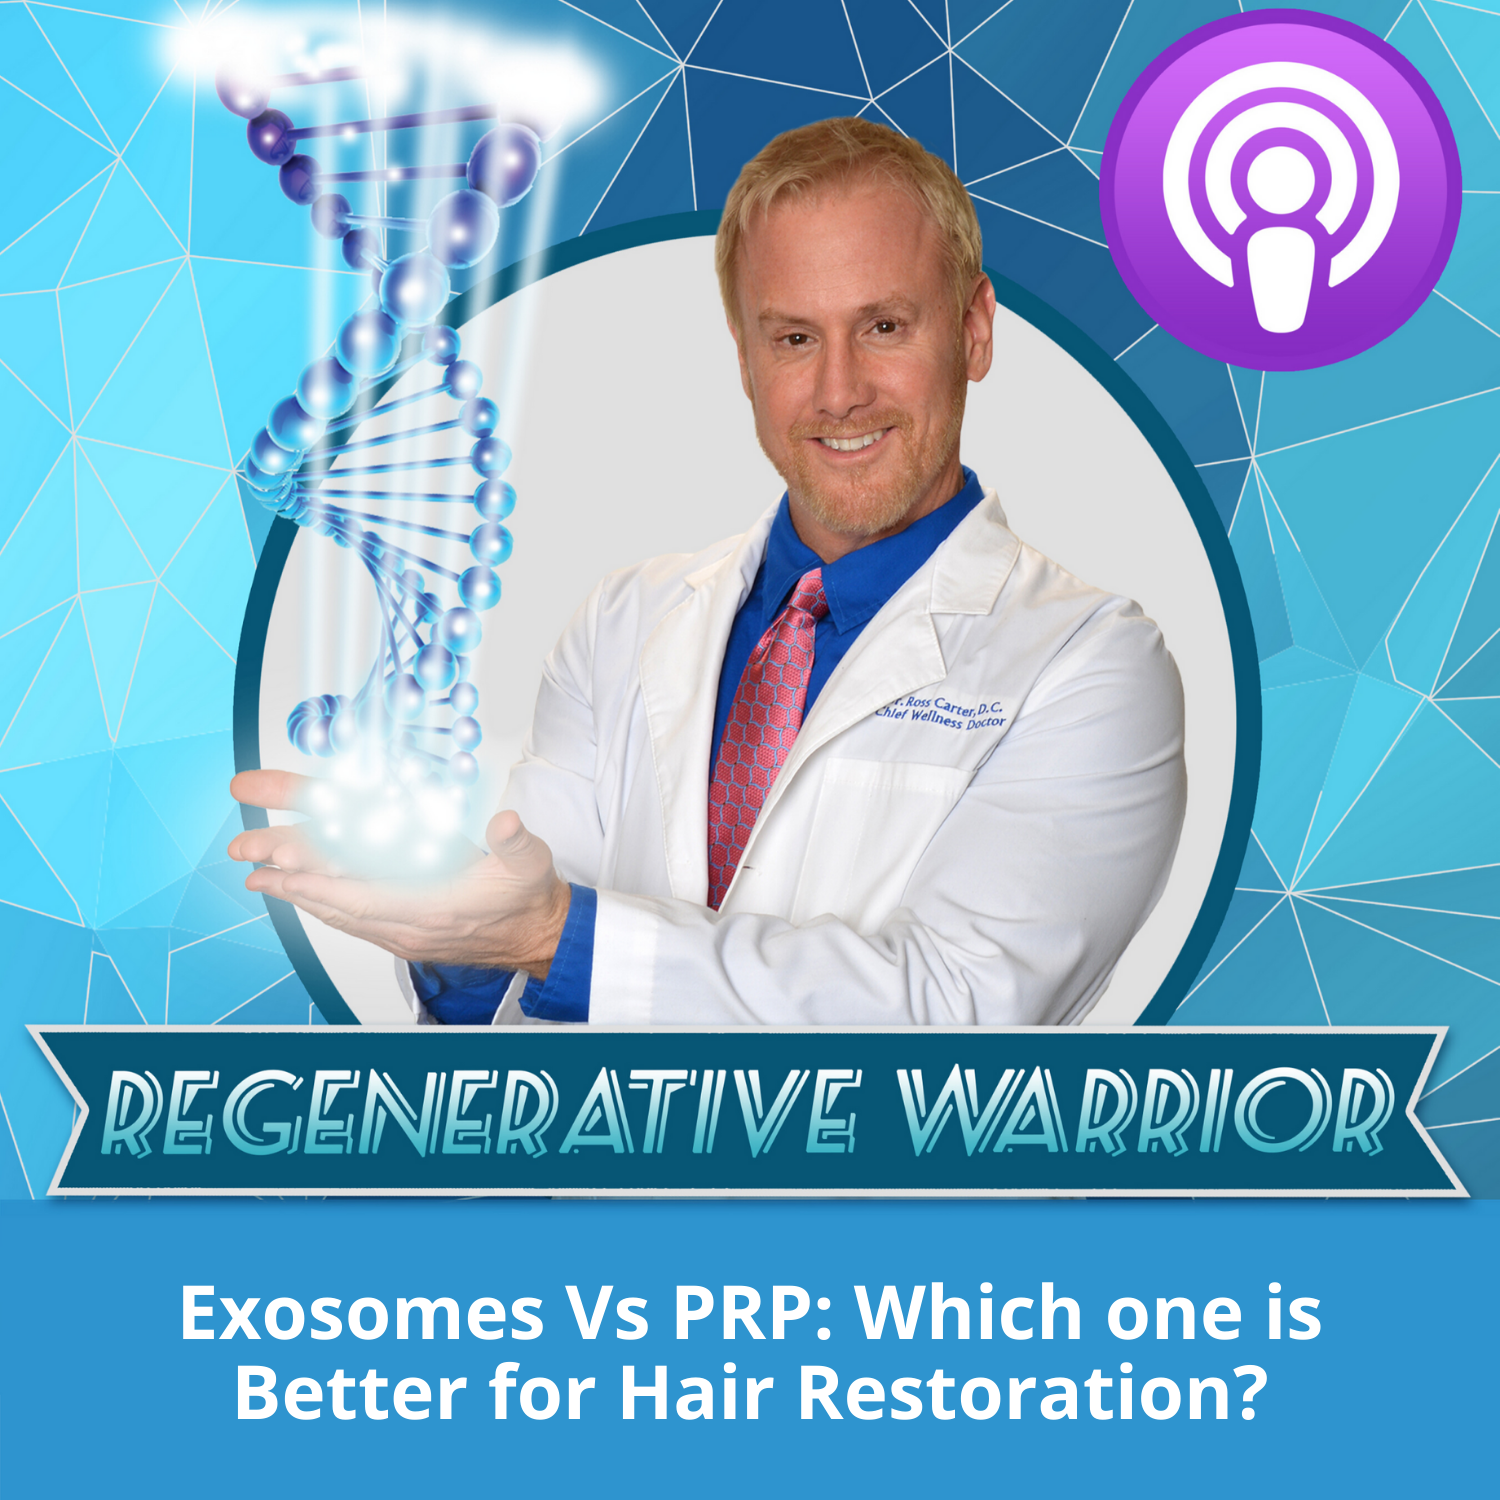 Exosomes Vs PRP: Which one is Better for Hair Restoration?